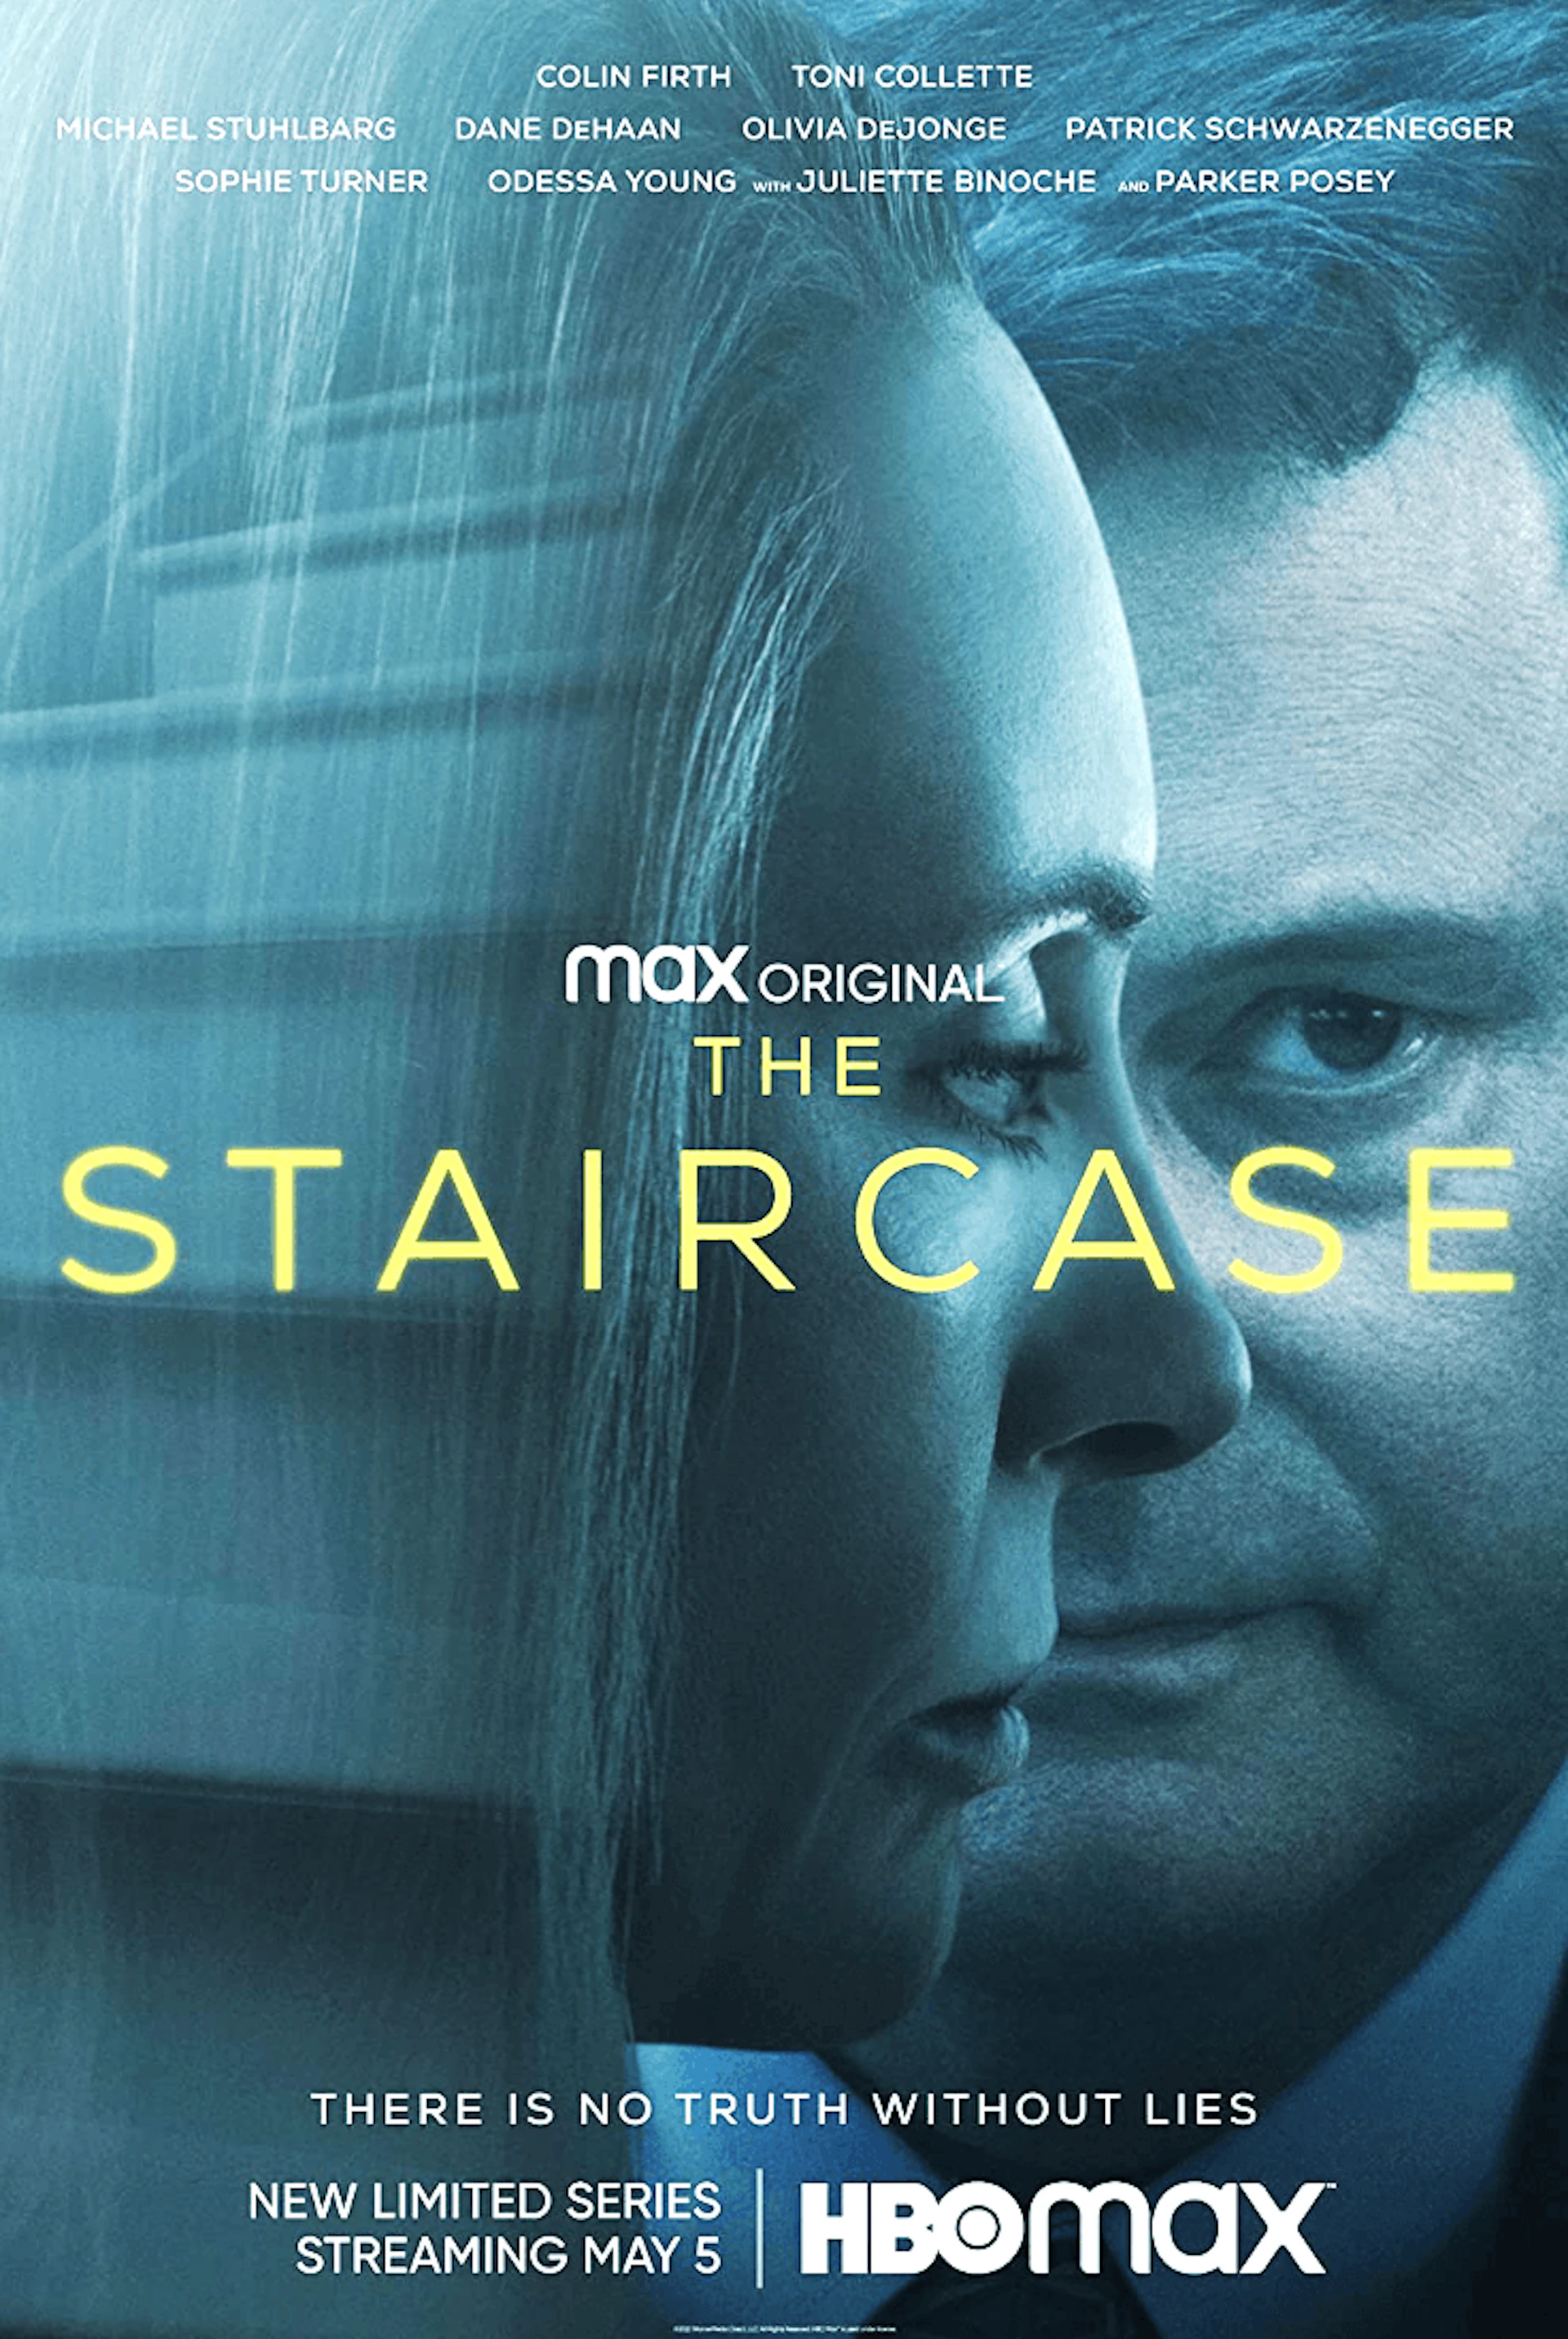 The Staircase - International versioning and dubbing